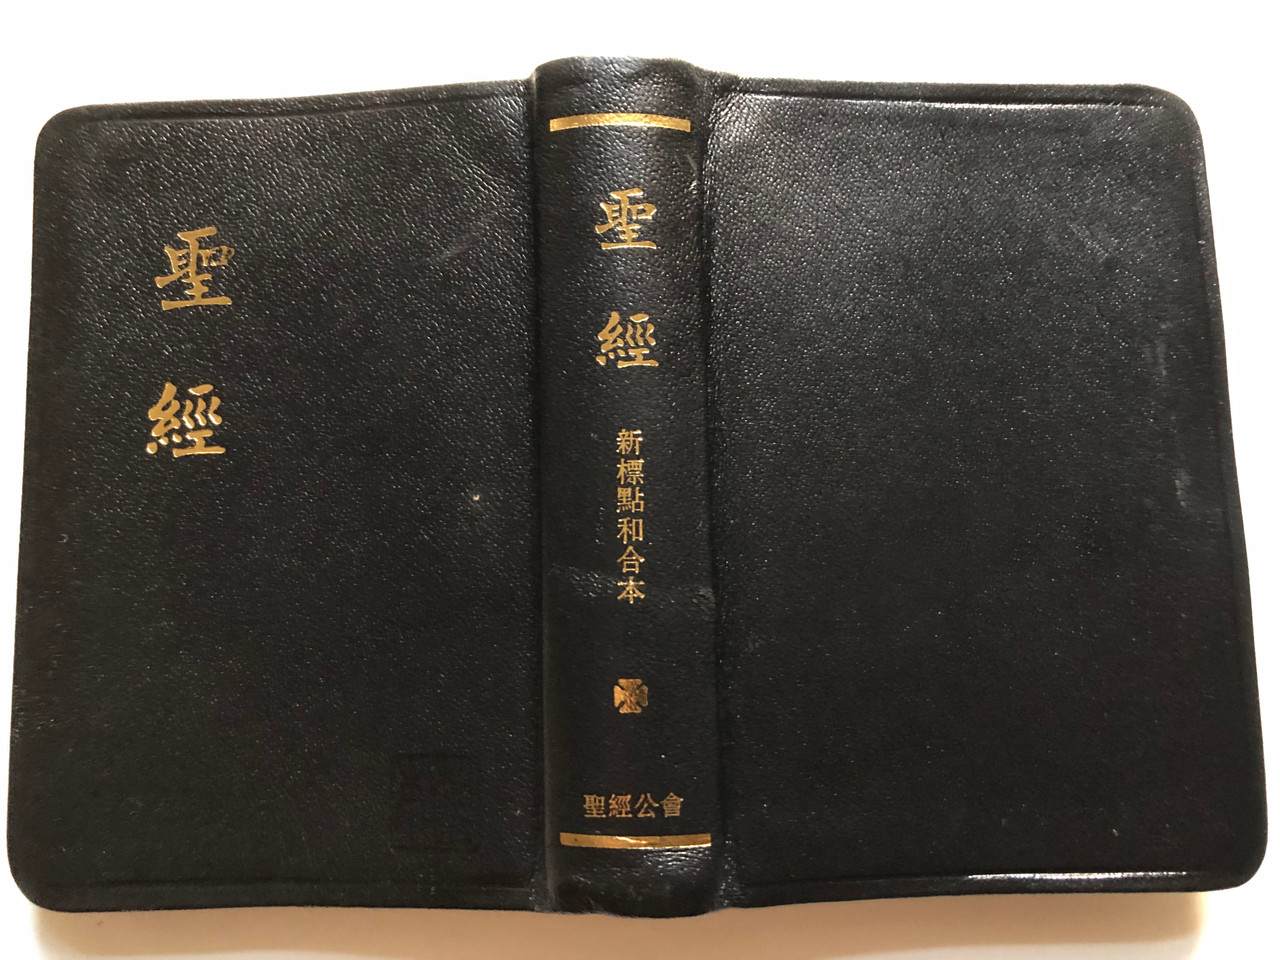 https://cdn10.bigcommerce.com/s-62bdpkt7pb/products/50544/images/257807/Chinese_Holy_Bible_-_Vertical_16__12749.1667631593.1280.1280.JPG?c=2